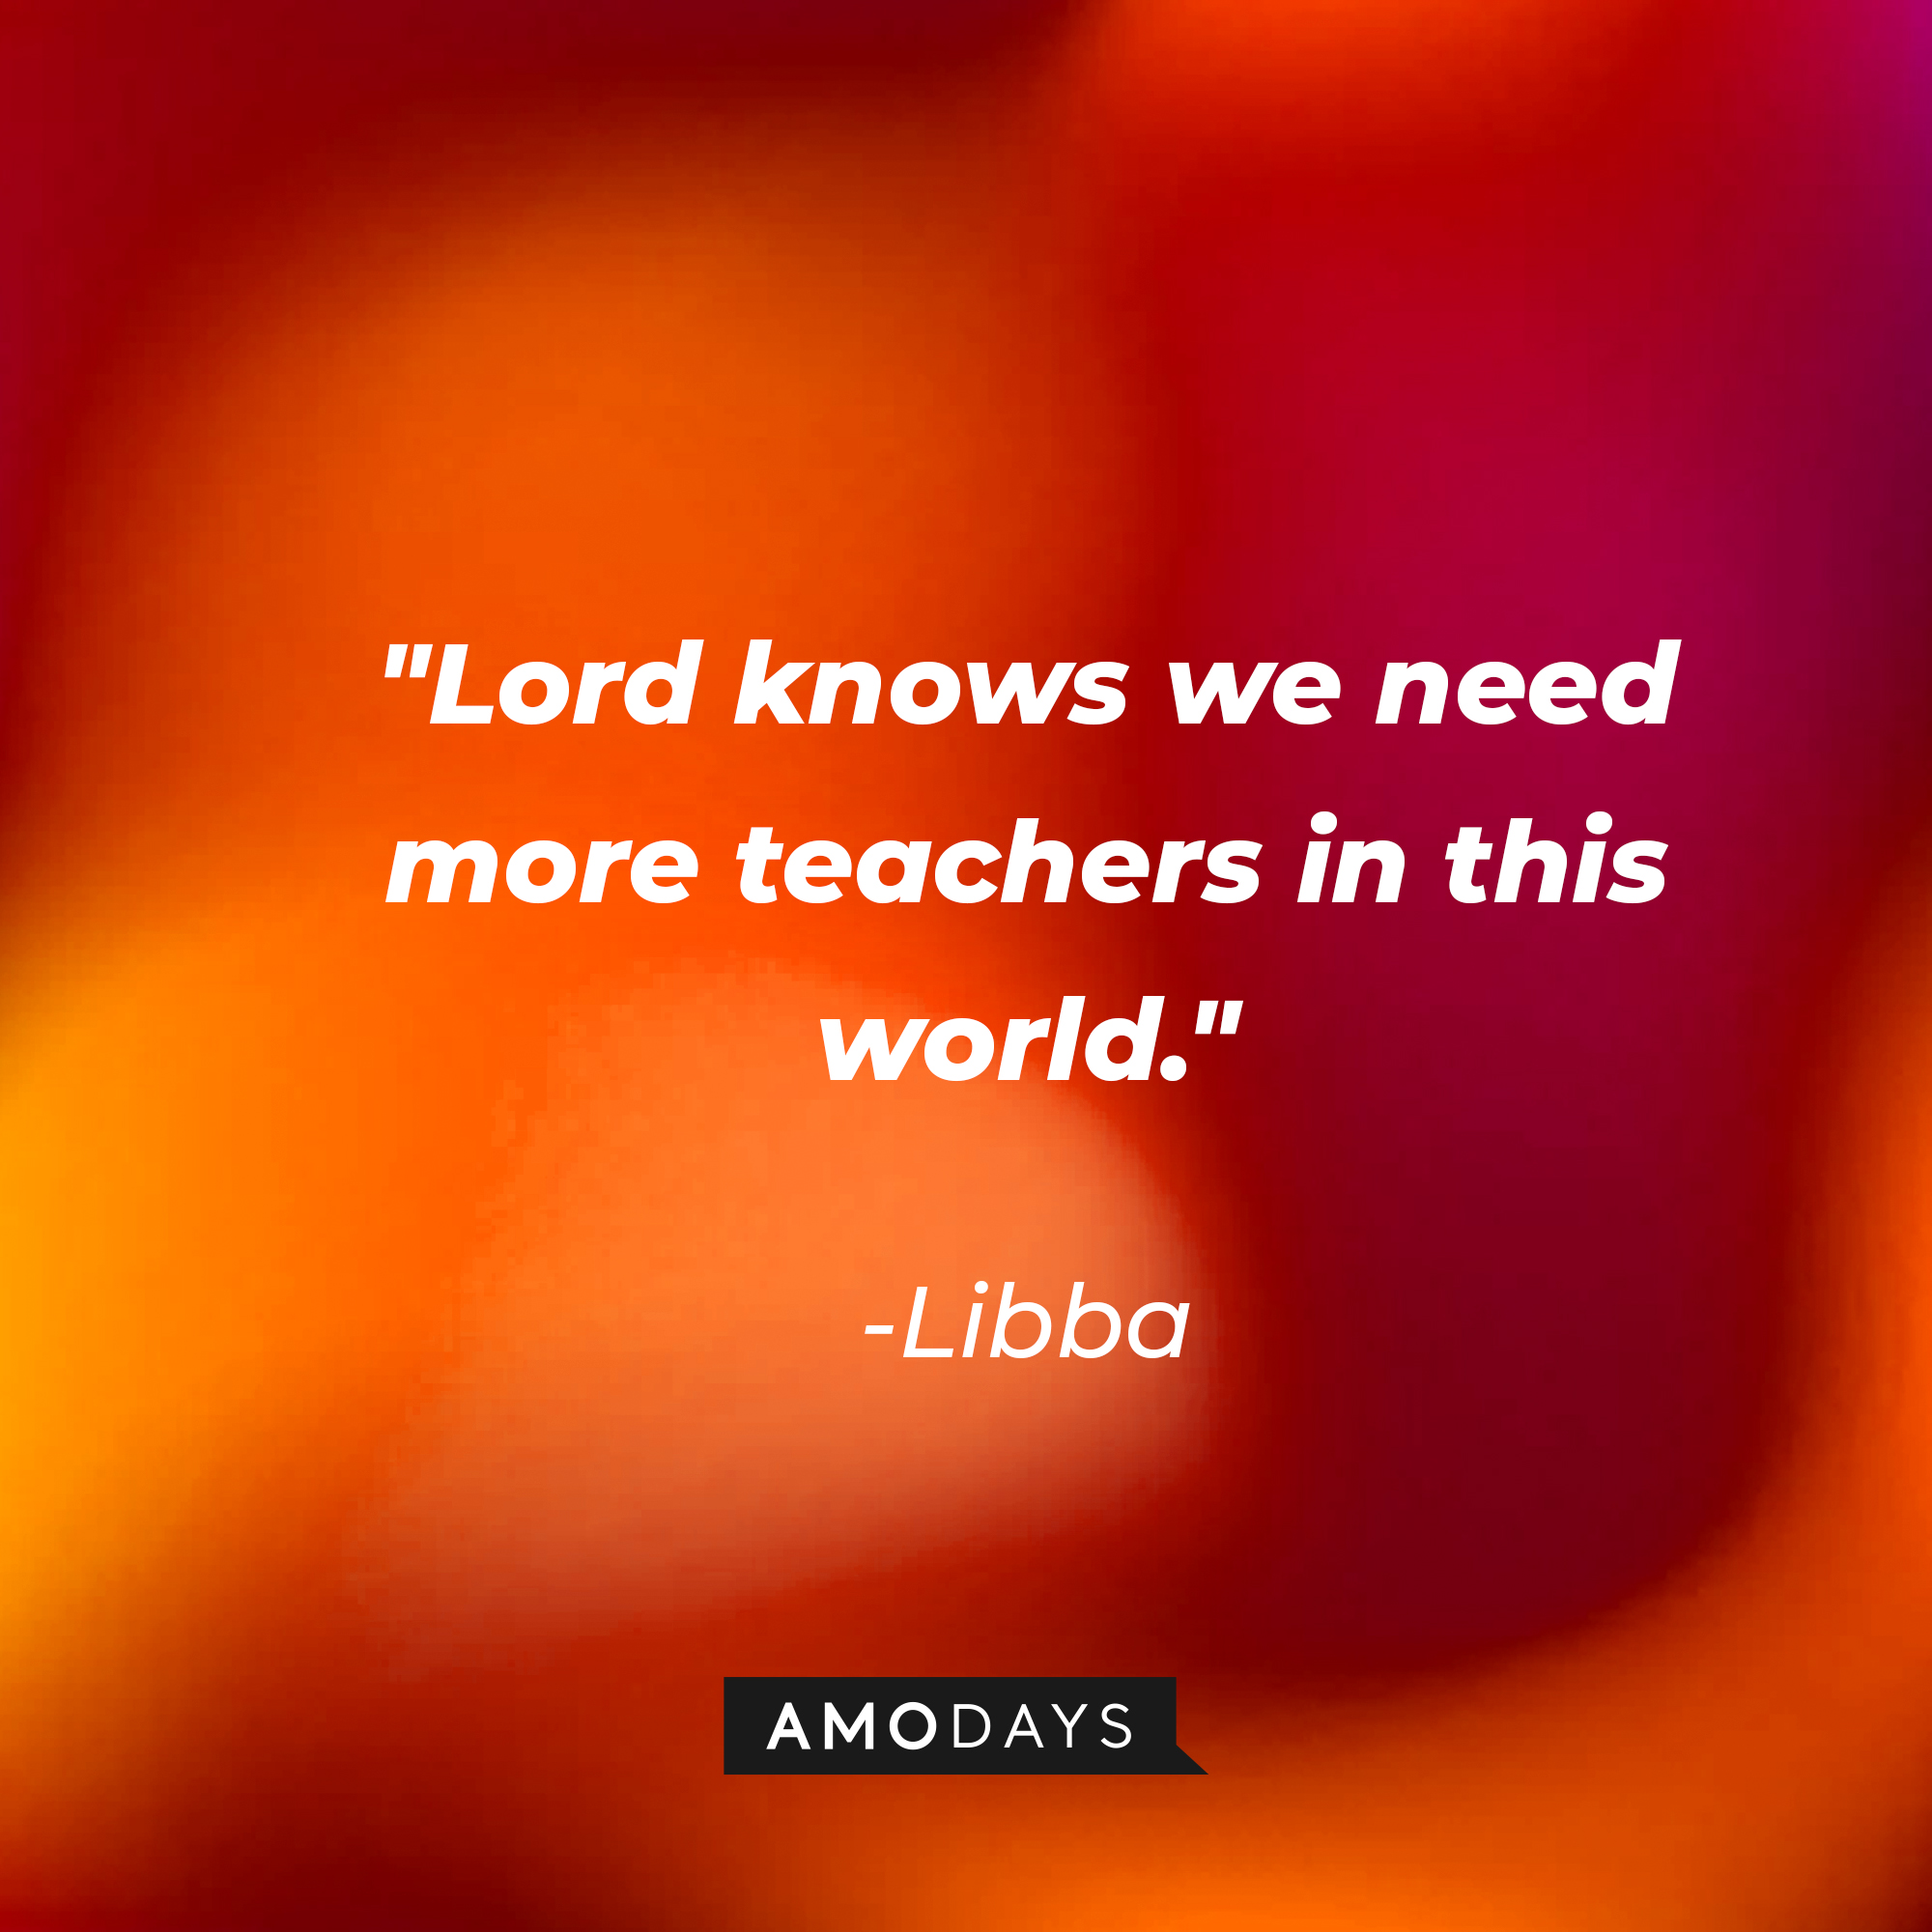 Libba's quote: "Lord knows we need more teachers in this world." | Source: youtube.com/pixar